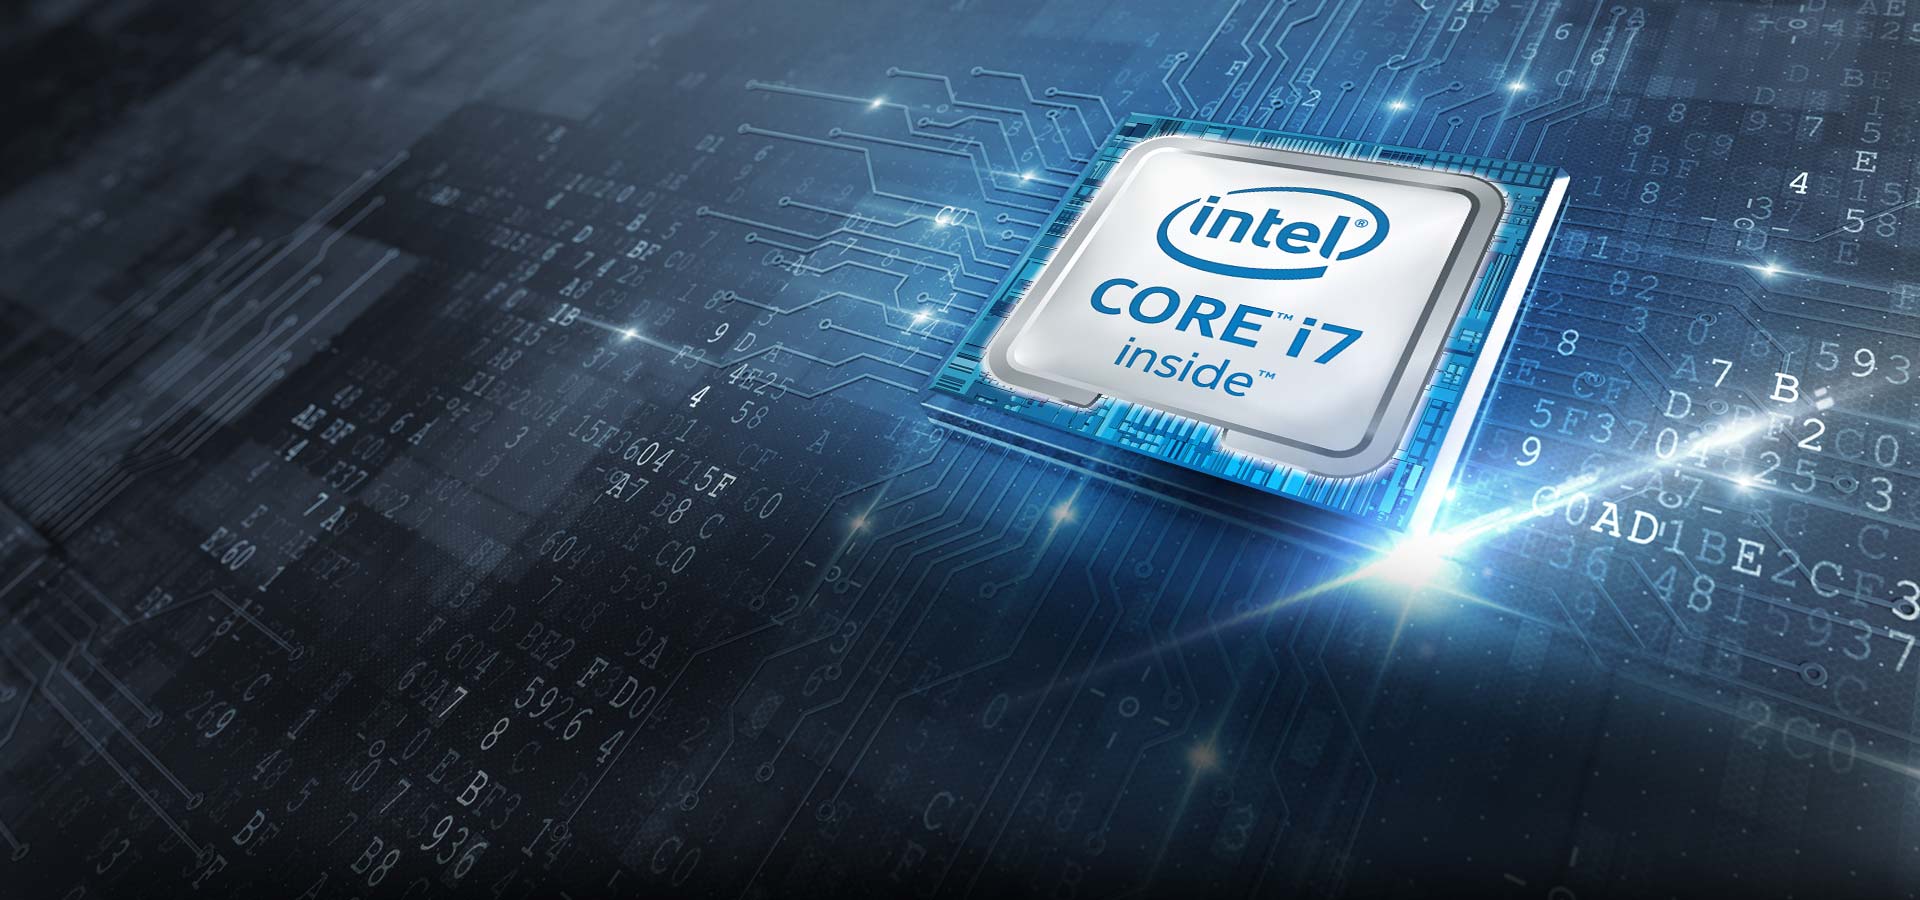 Intel I7 Wallpapers Top Free Intel I7 Backgrounds Wallpaperaccess 6207